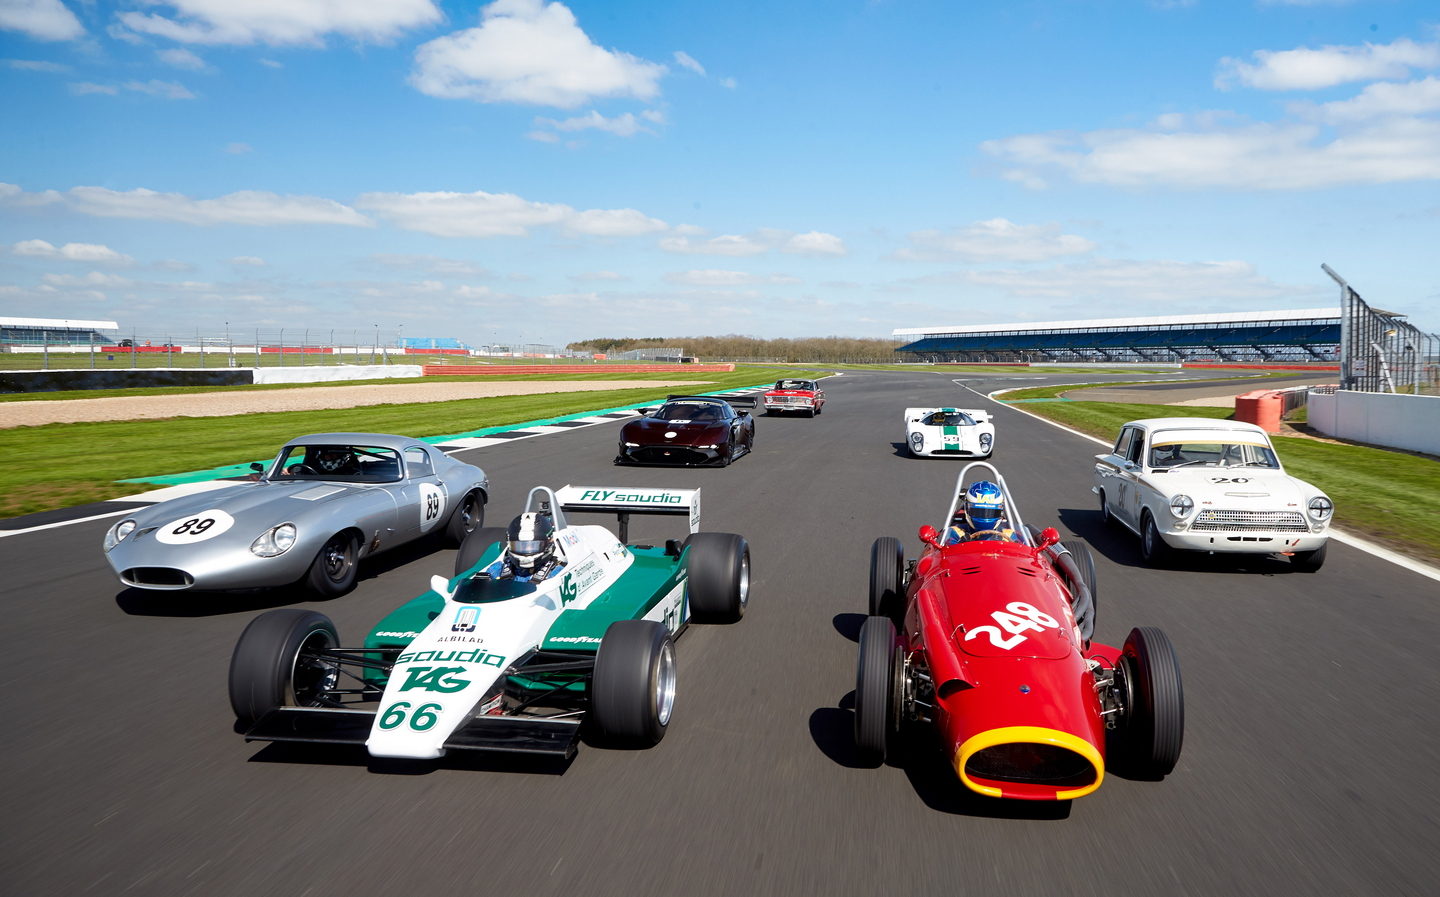 Silverstone Festival 2023 guide: The themes, cars, race schedules, ticketing info and more